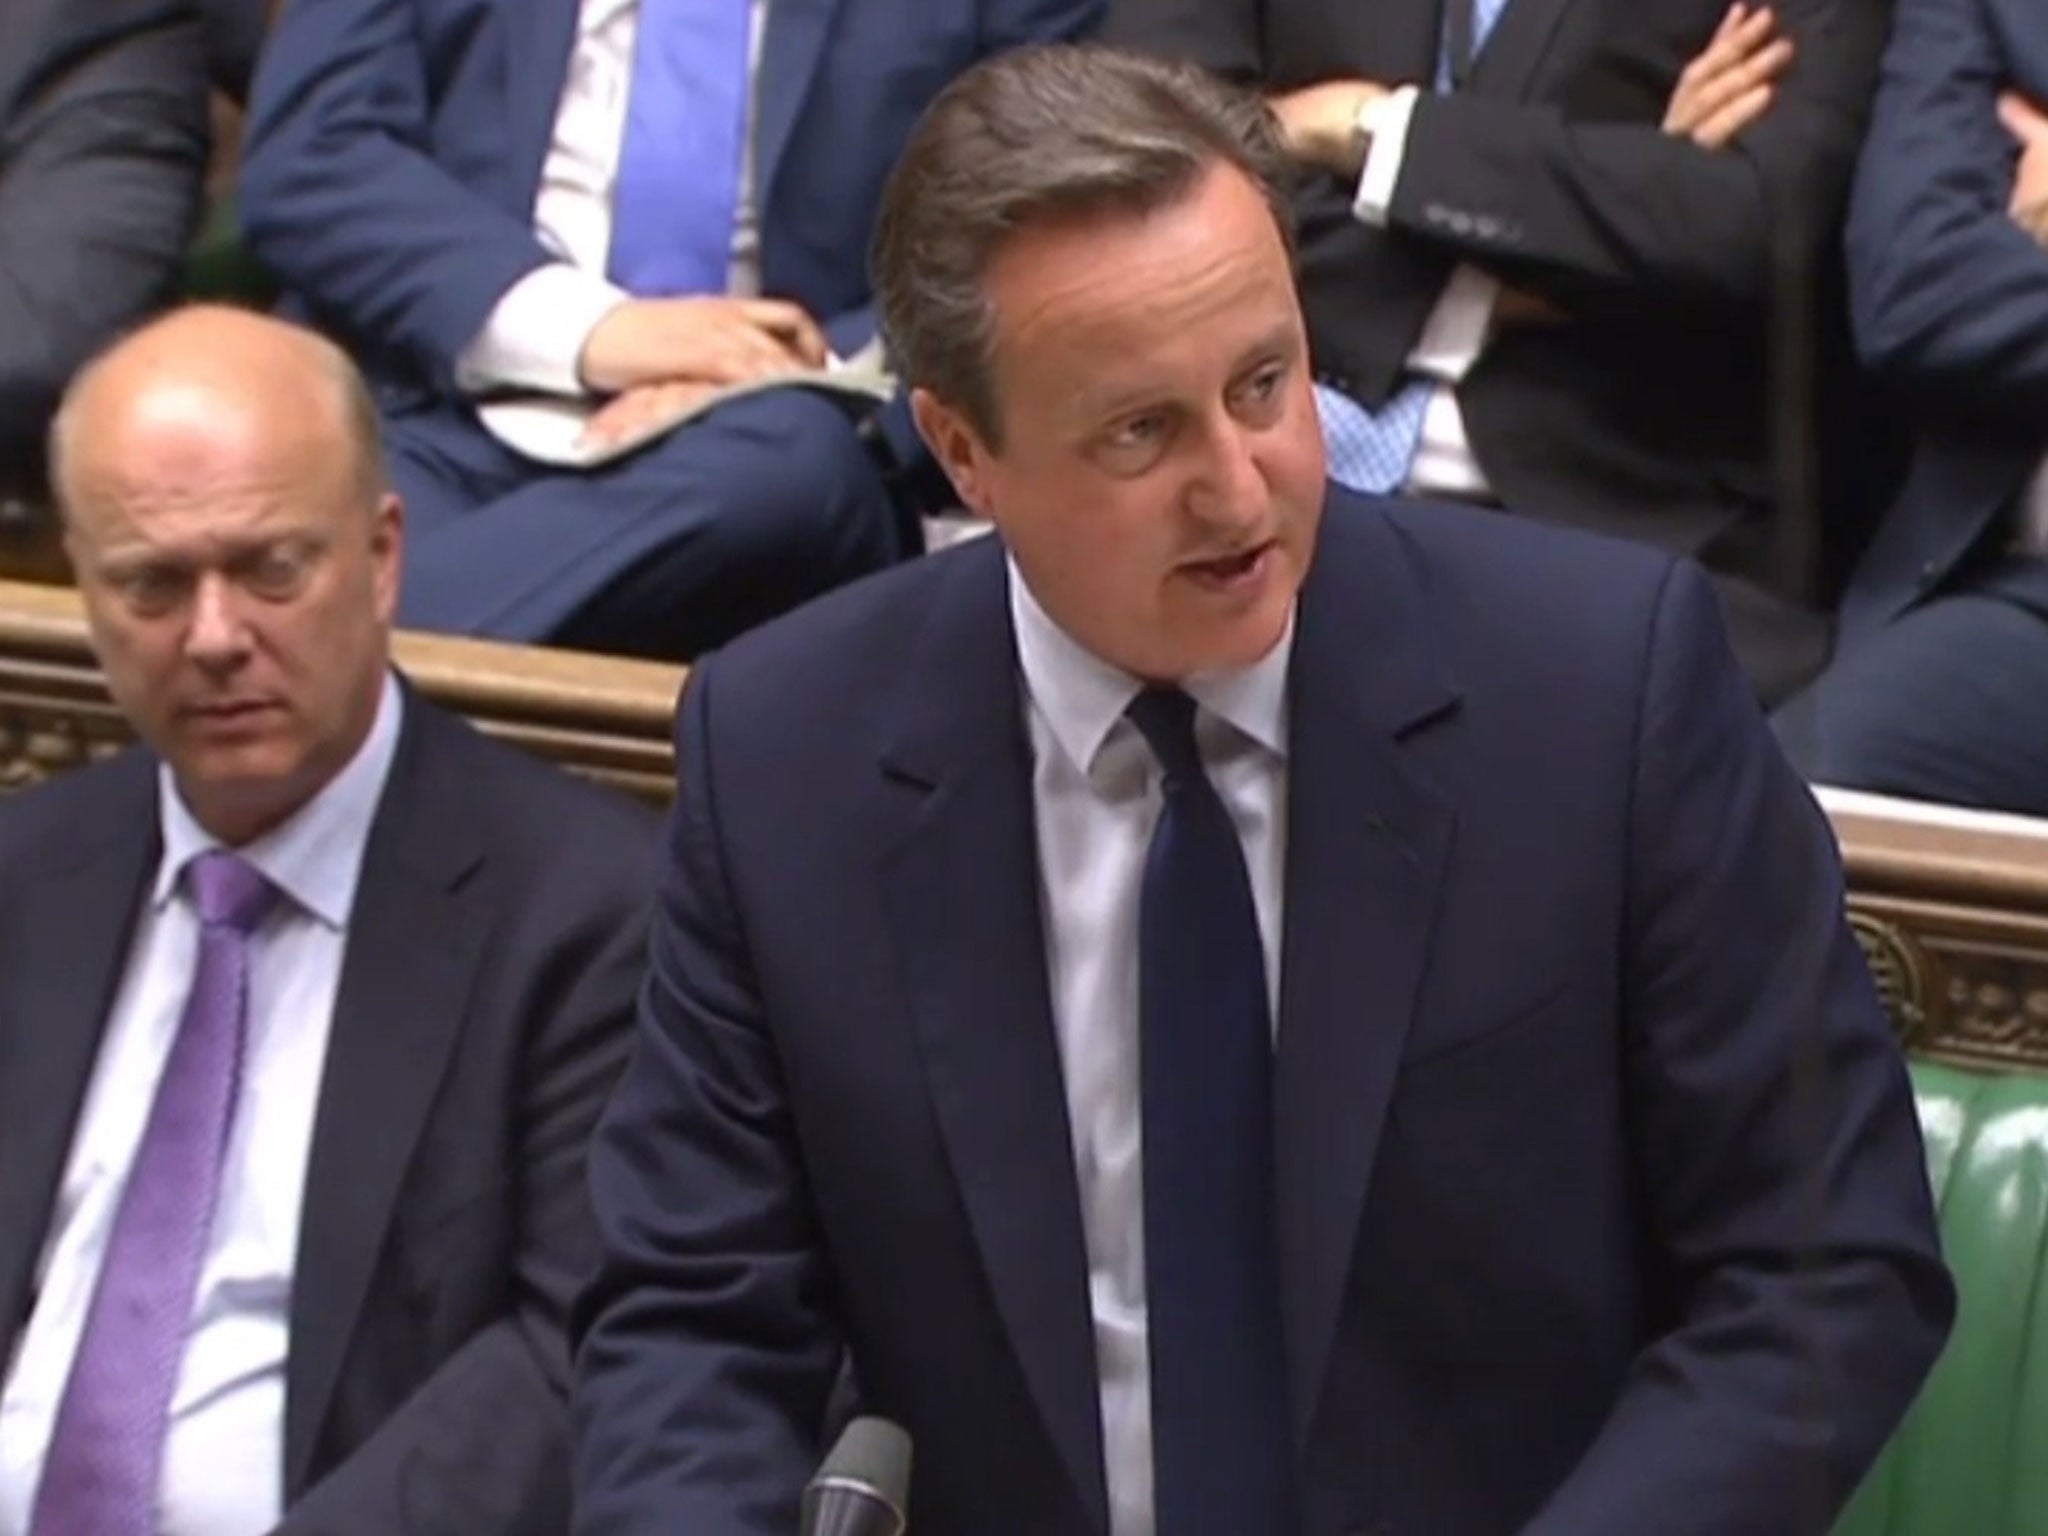 David Cameron giving a statement in Parliament in London on June 27, 2016